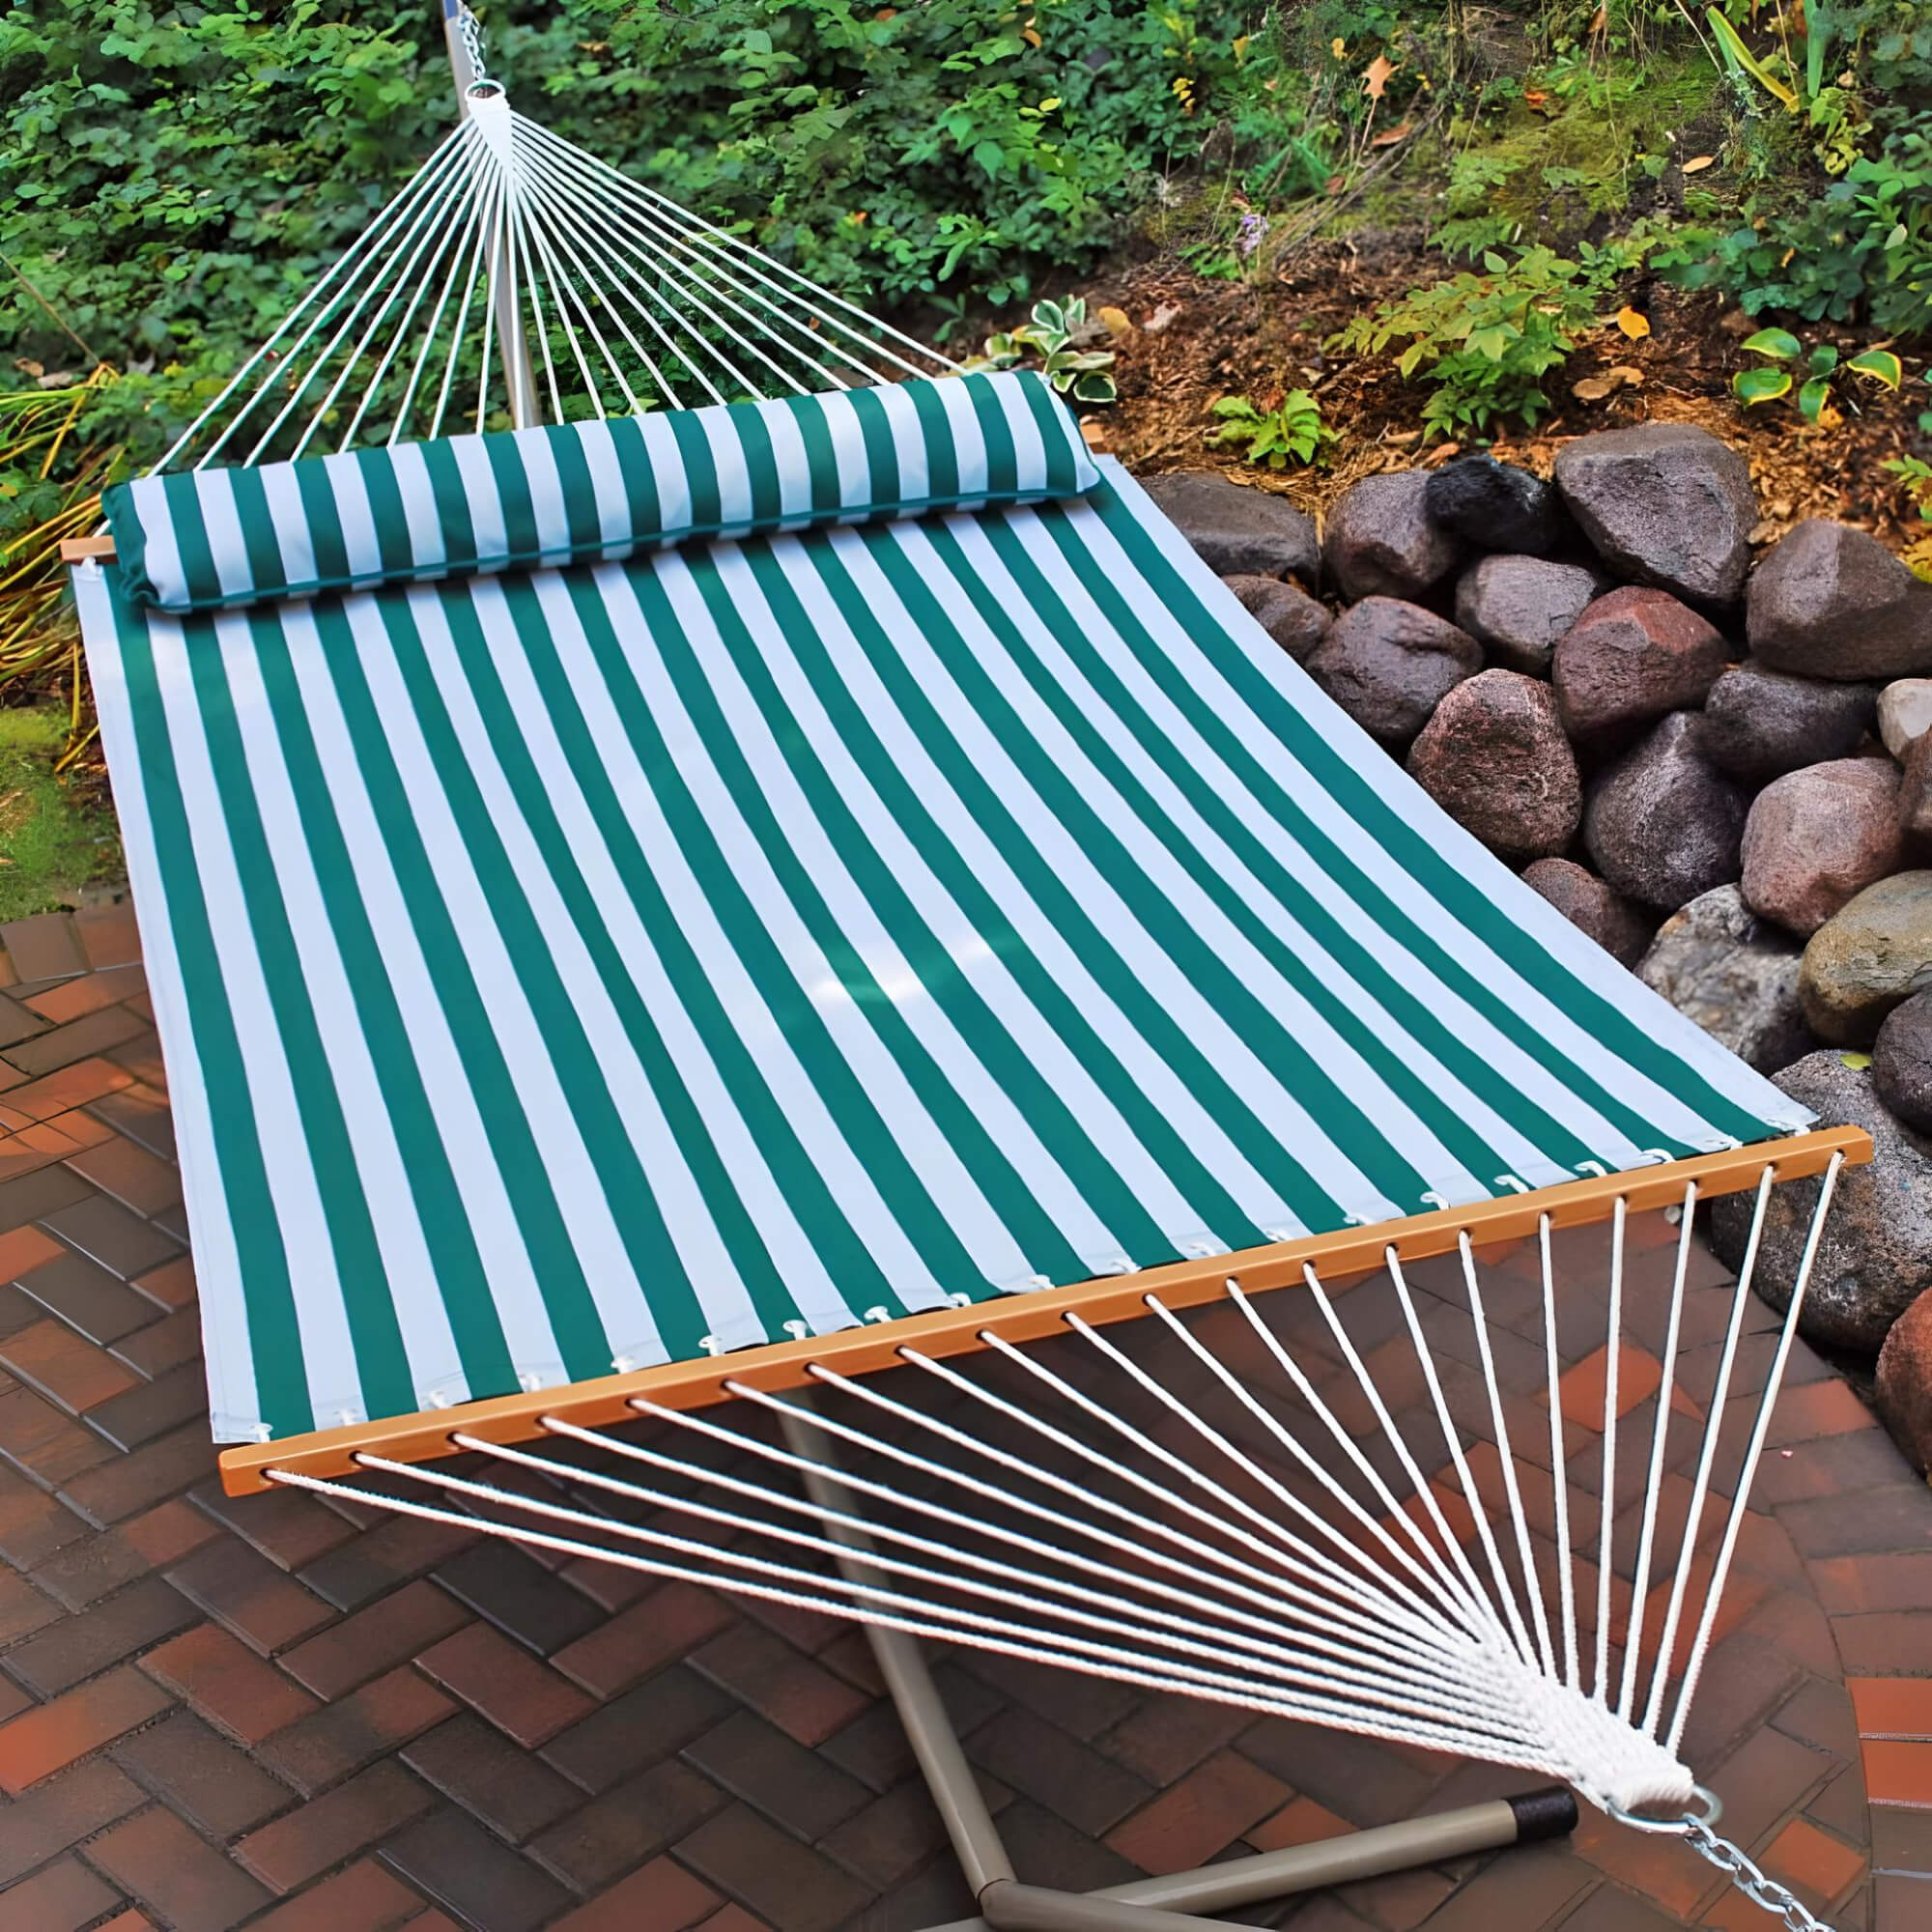 greenand-white-color-2-person-hammock-with-stand